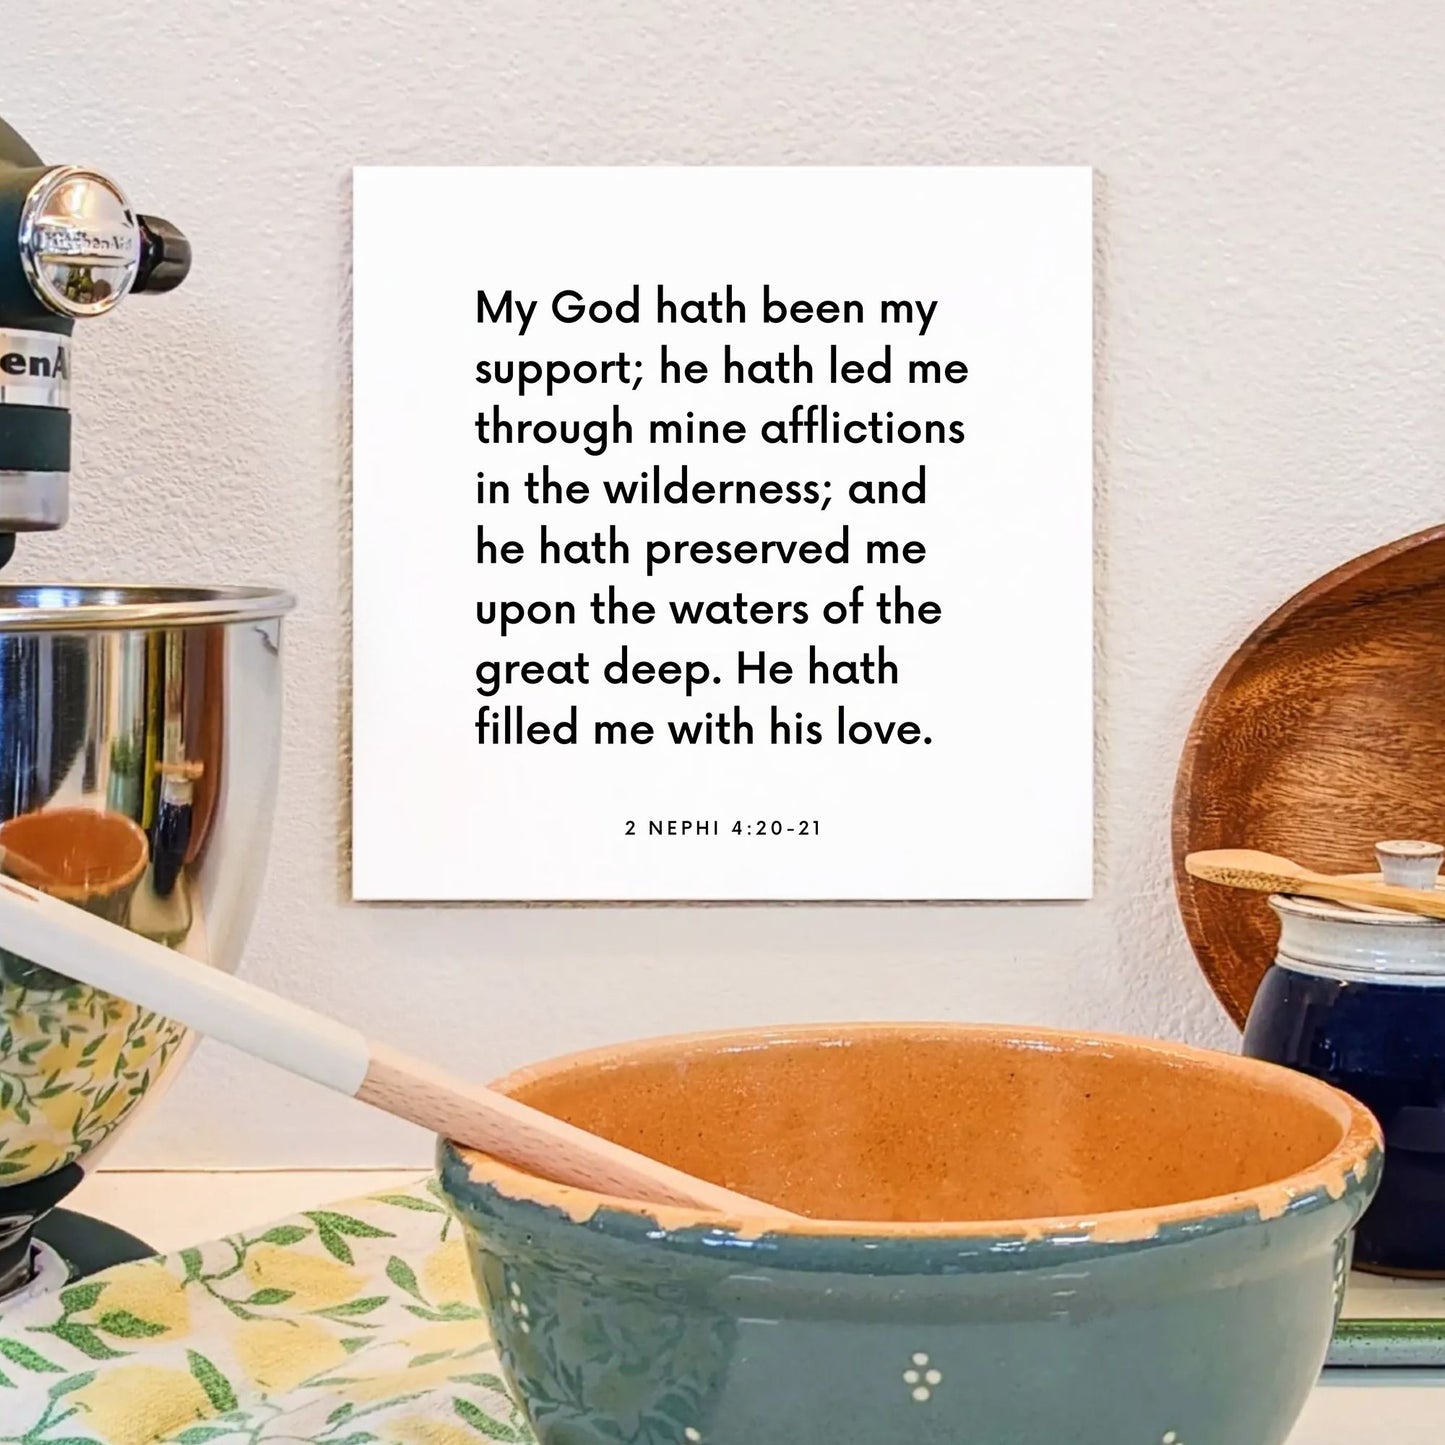 Kitchen mouting of the scripture tile for 2 Nephi 4:20-21 - "My God hath been my support"